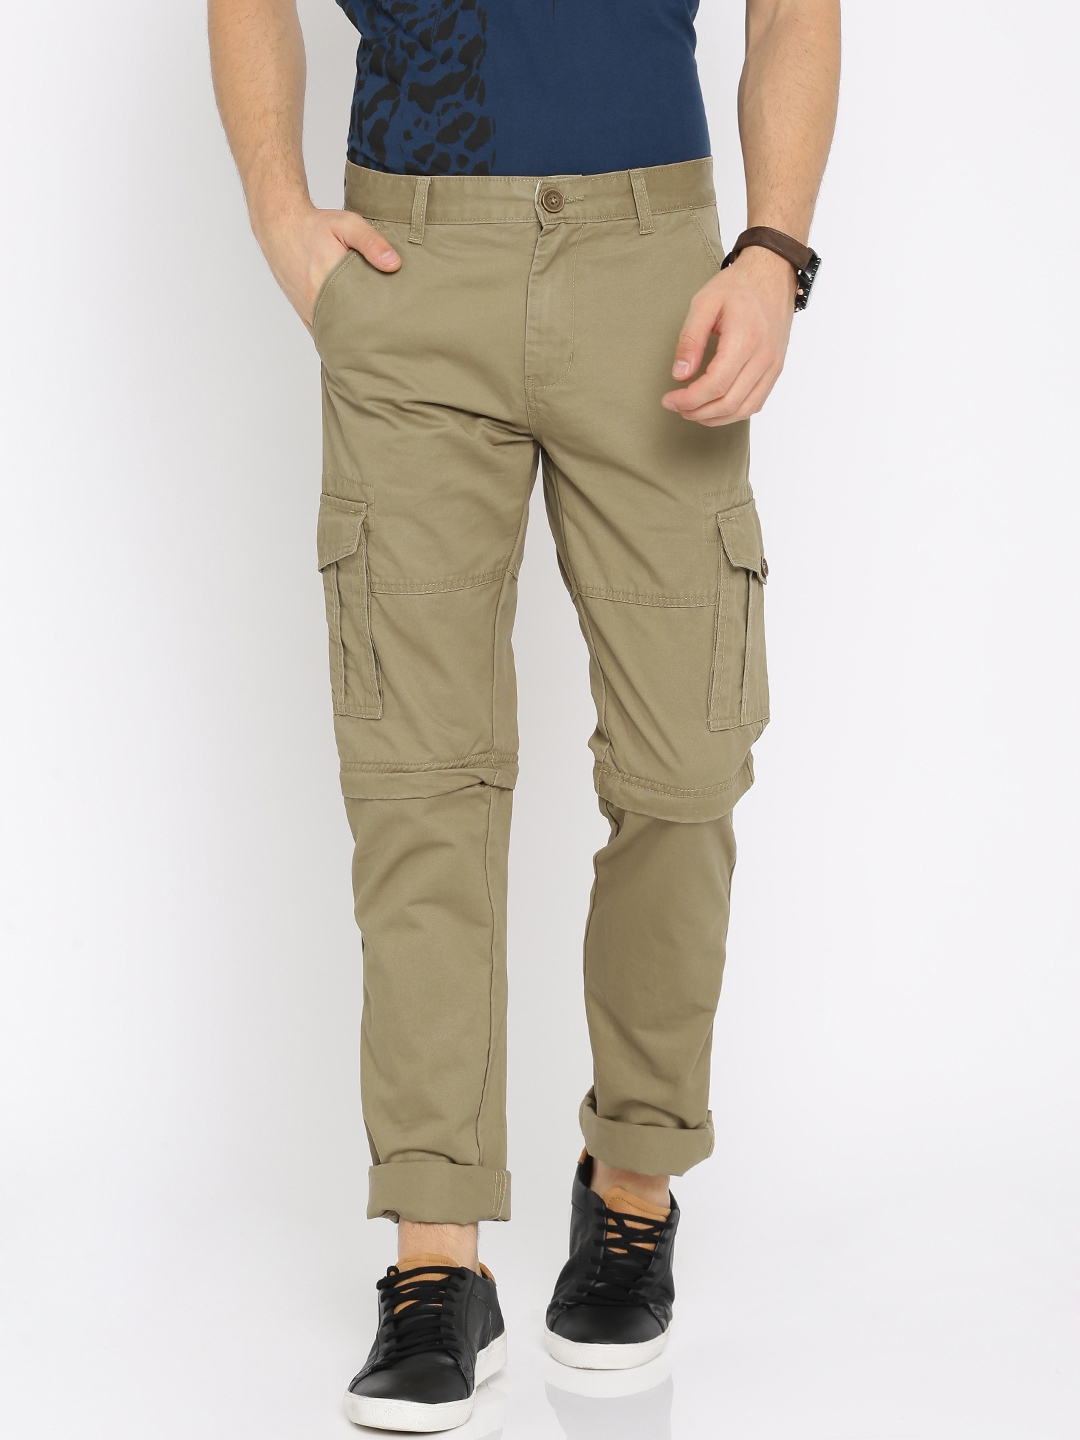 Buy Rig Mens Cotton Cargo Trousers Grey 38 at Amazonin